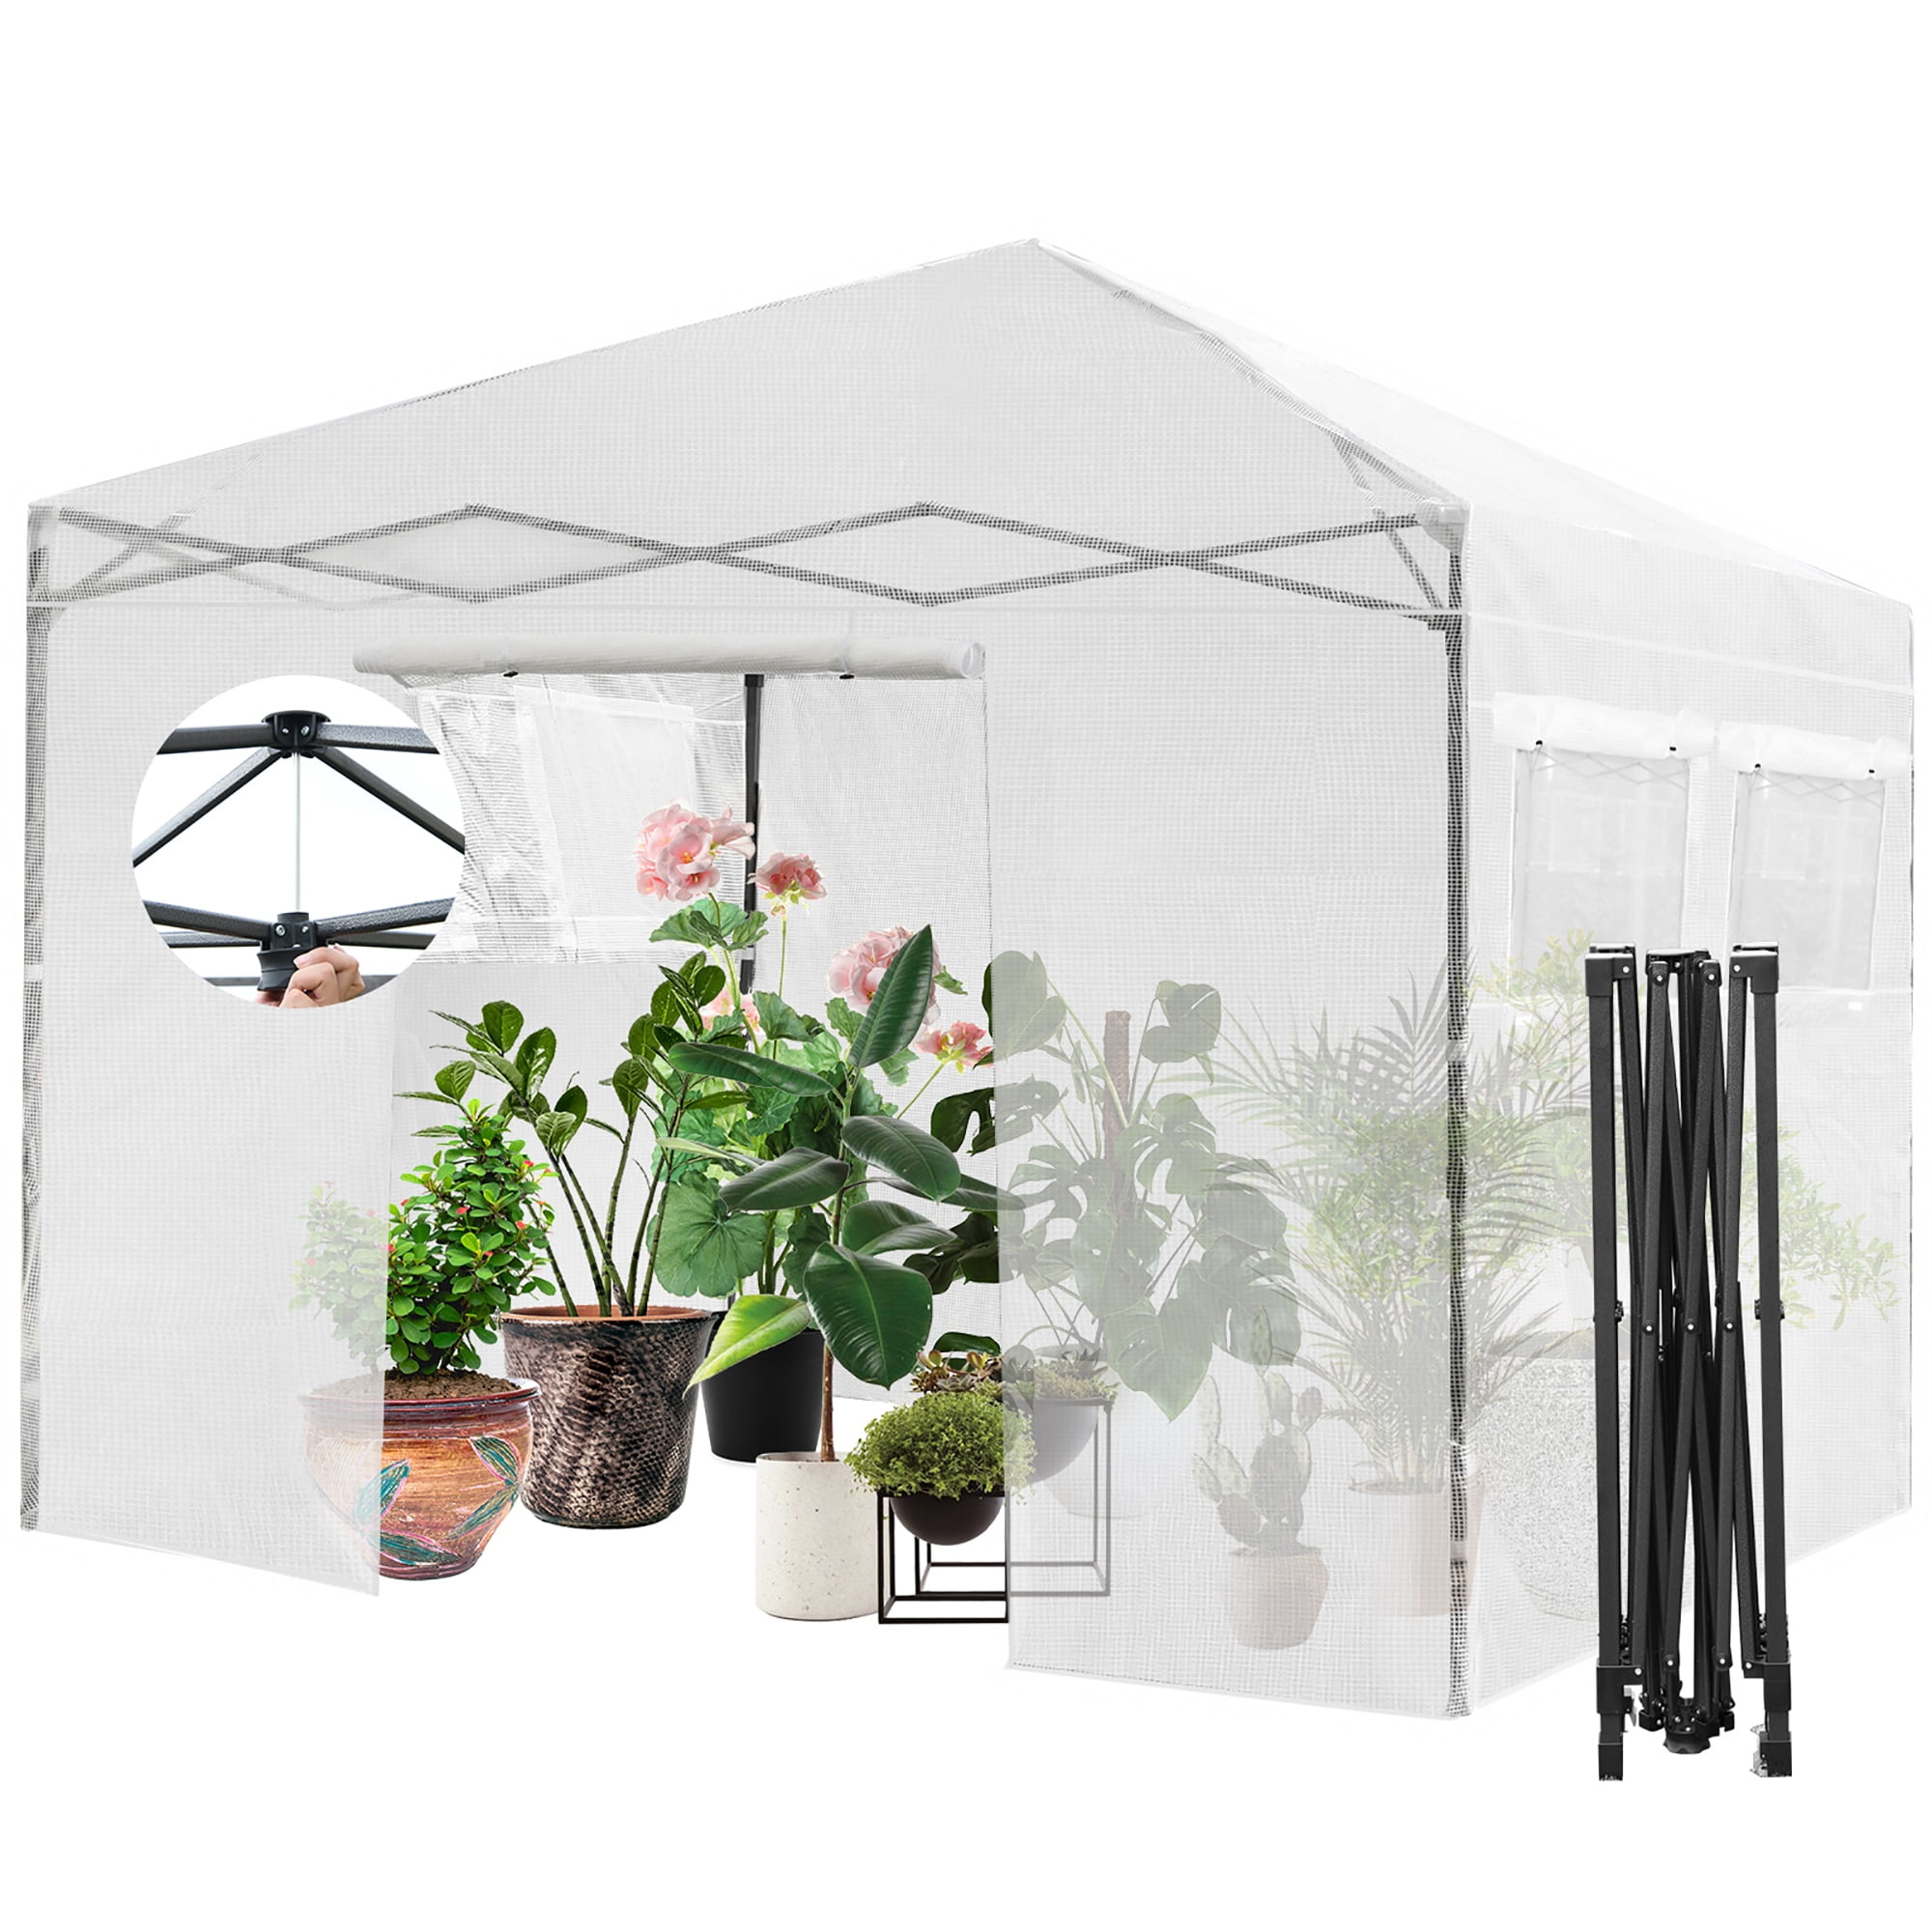 Worth Garden Pop-up Walk-in Greenhouse 10 L x 10 W x 9.7 H Portable Fast Setup for Indoor Outdoor Grow Plant Gardening Greenhouse Canopy with Front Roll-Up Zipper Entry Doors & 2 Windows 